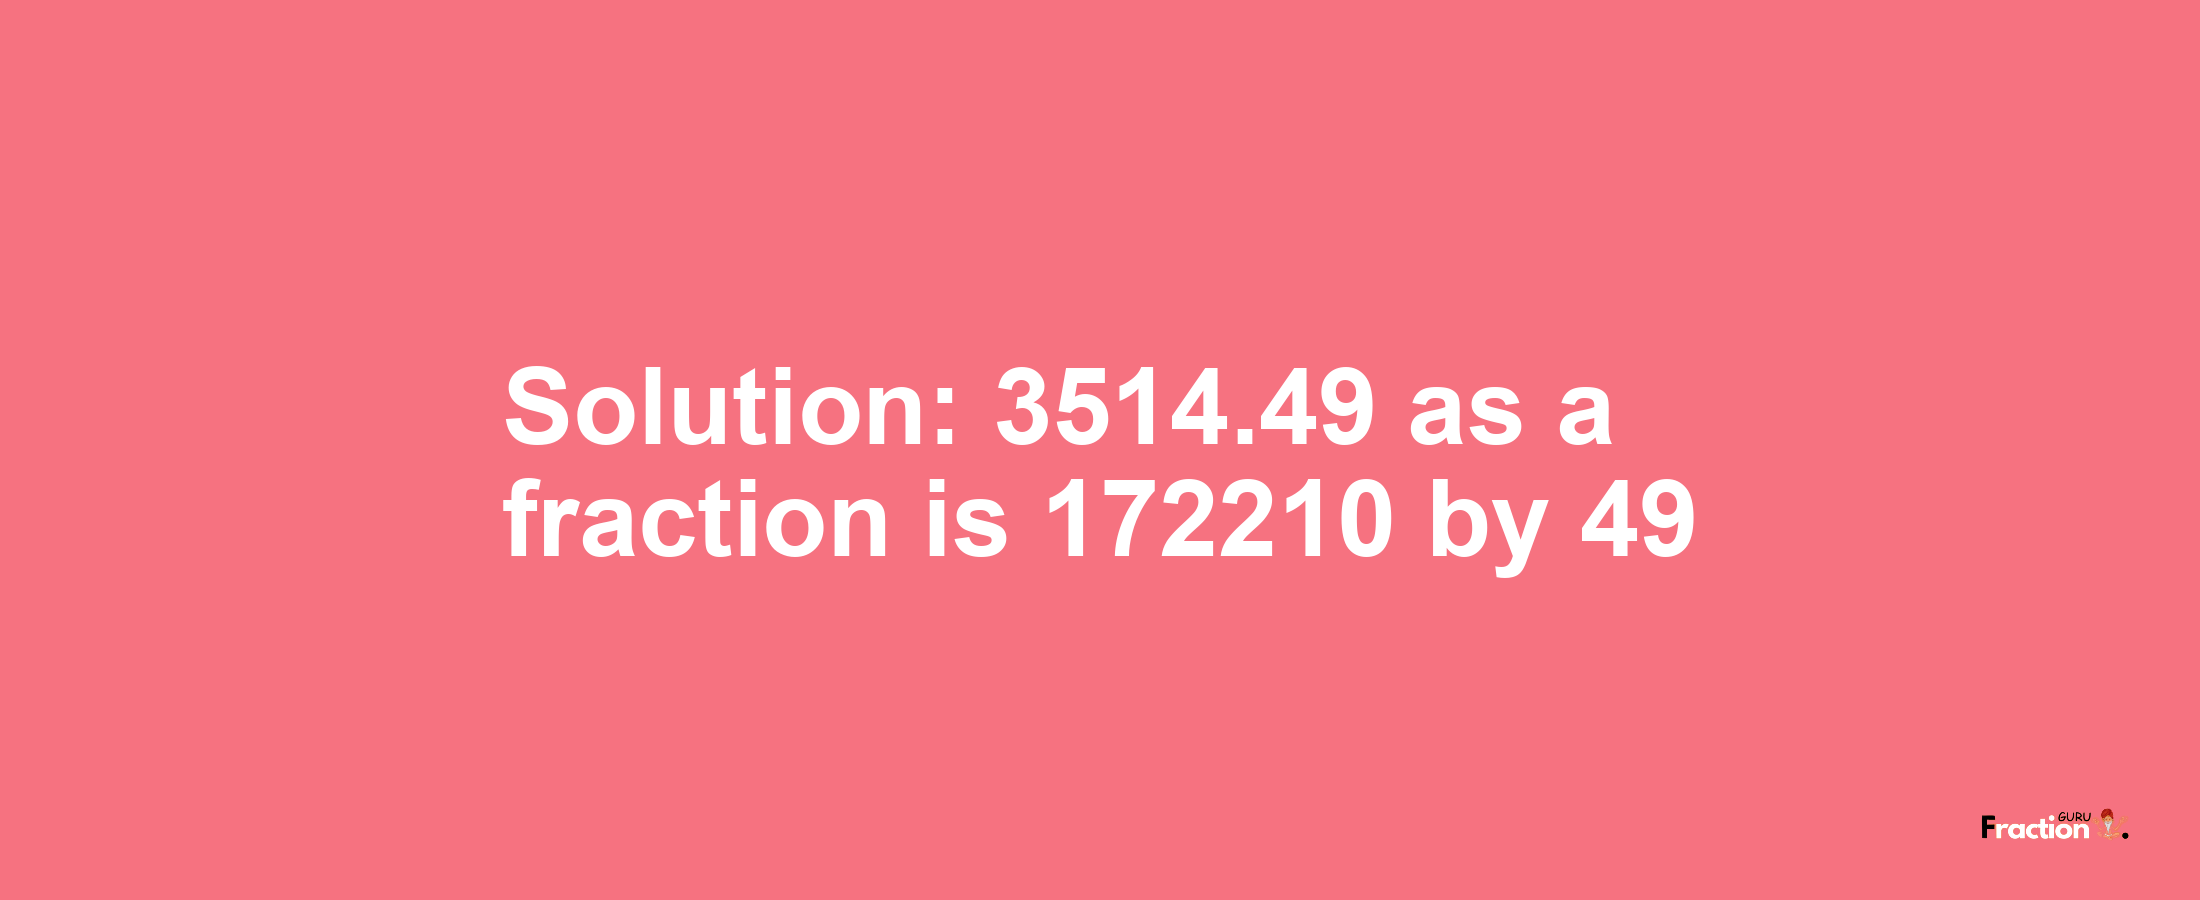 Solution:3514.49 as a fraction is 172210/49